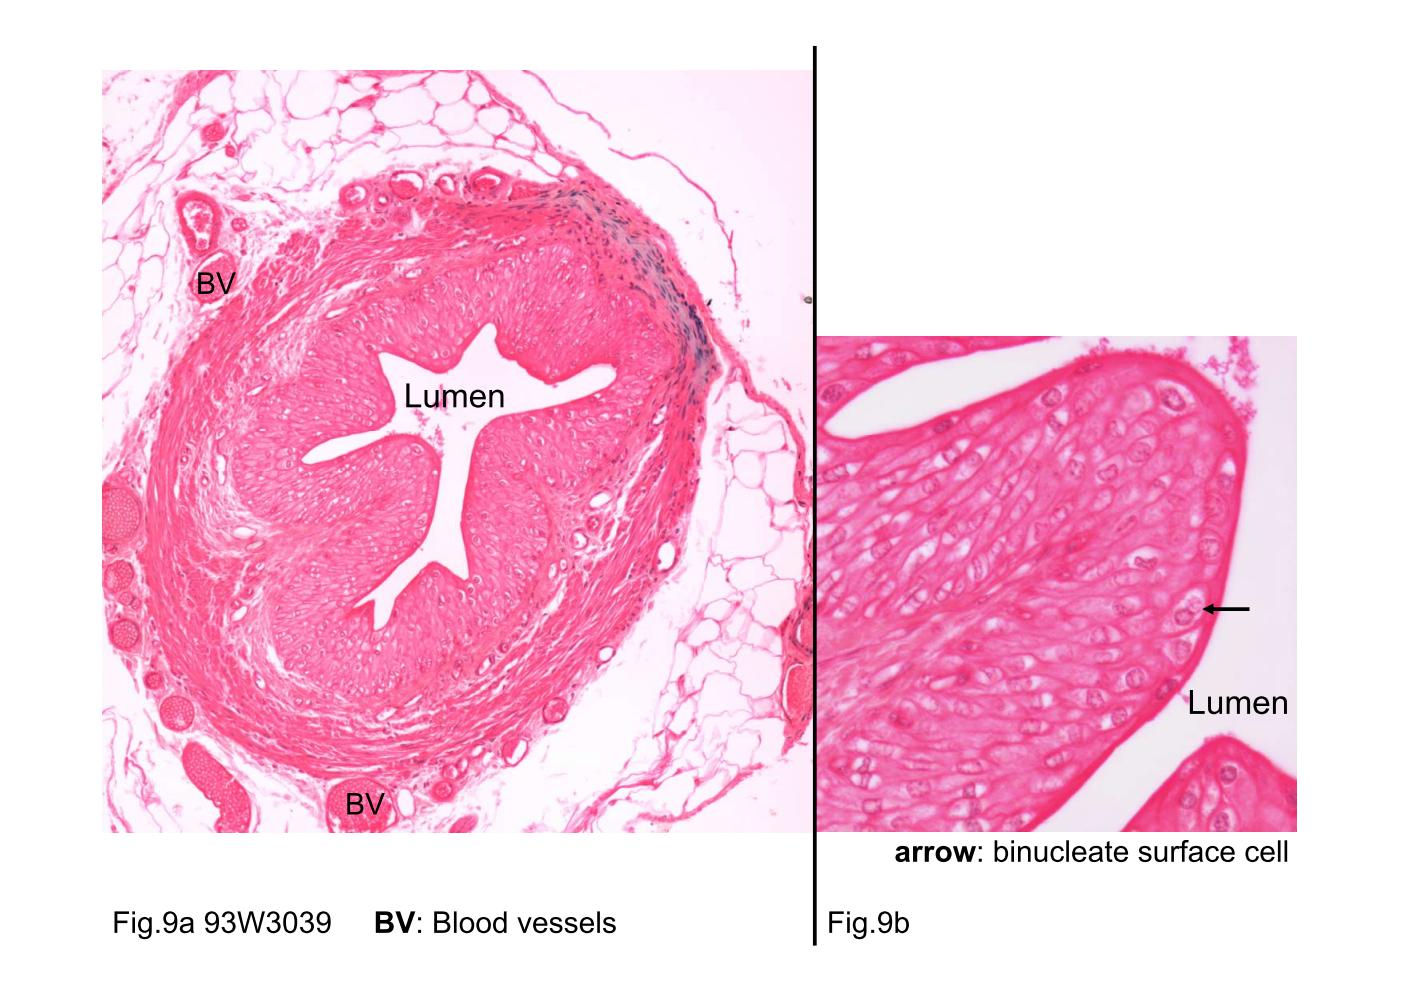 block8_17.jpg - Fig.9 93W3039, Transitional epithelium (cs) , HE. ThisH&E-stained specimen shows the 5- to 6-cell-layer thicknessof the epithelium in the relaxed ureter. The surface cells arecharacteristically the largest, and some surface cells arebinucleate (arrow). The ability of this epithelium to becomethinner and flatter allows all of these passages toaccommodate to distension by the urine.